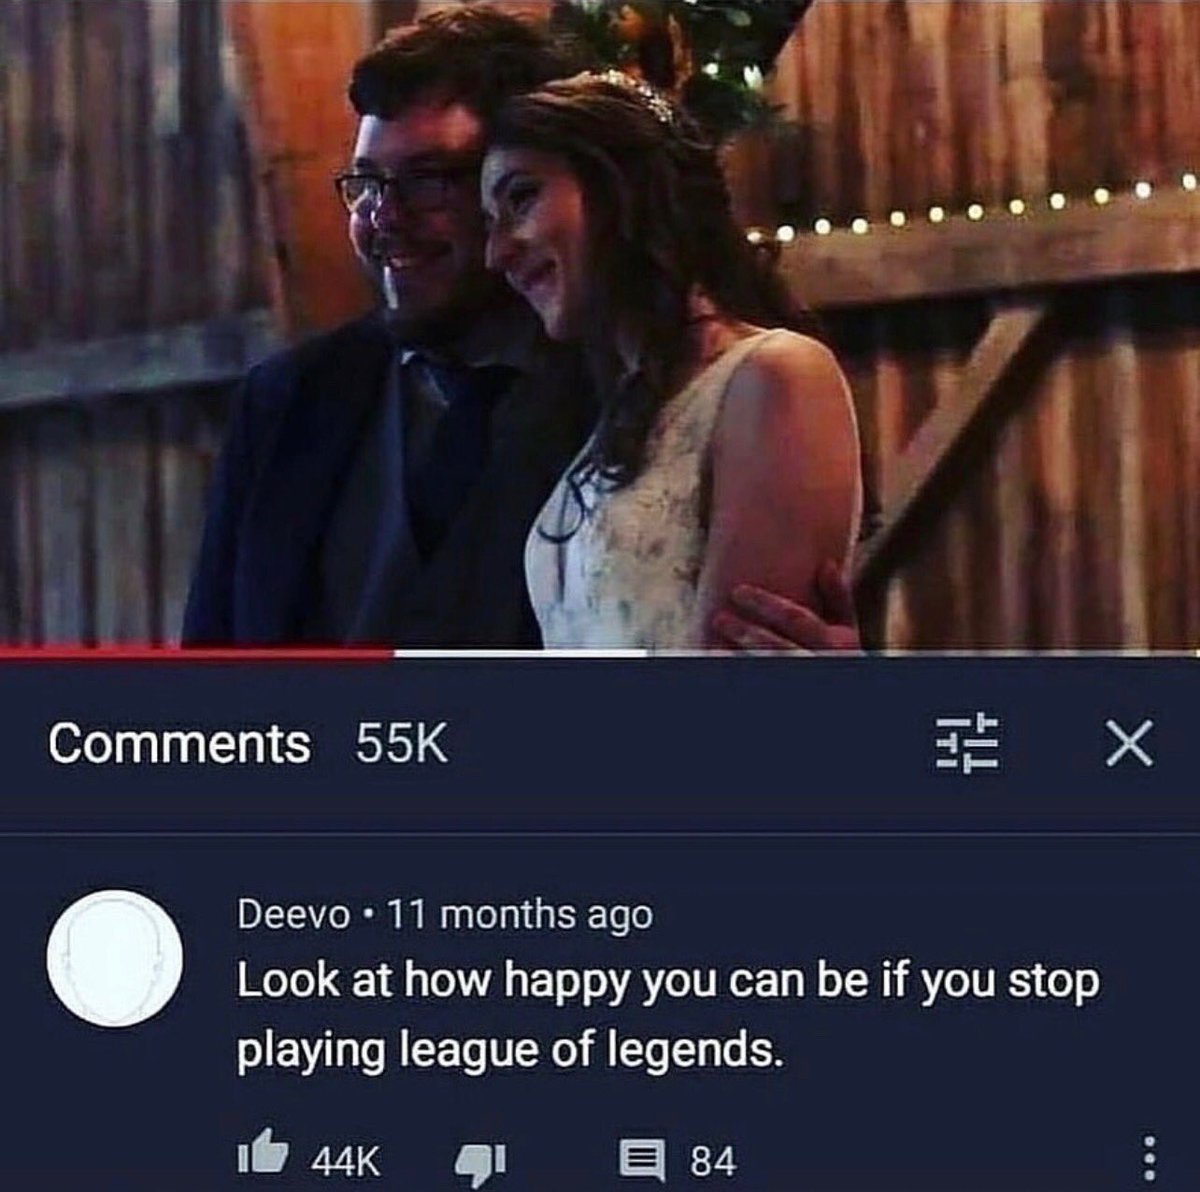 insane youtube comments - look at how happy you can be if you stop playing league of legends - 55K Deevo 11 months ago Look at how happy you can be if you stop playing league of legends. 44K 3 X 84